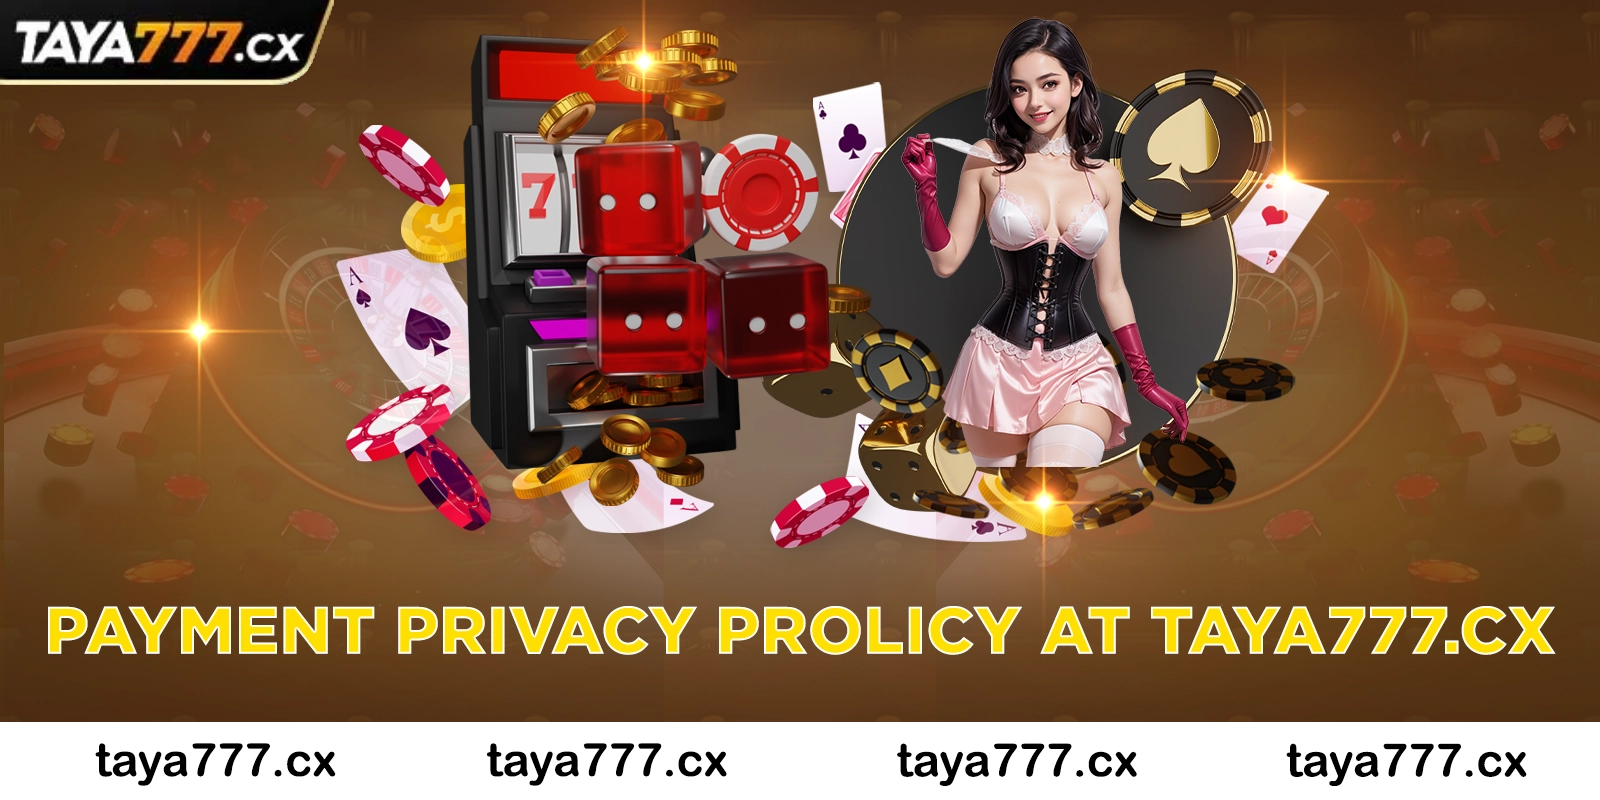 Payment privacy policy at Taya777